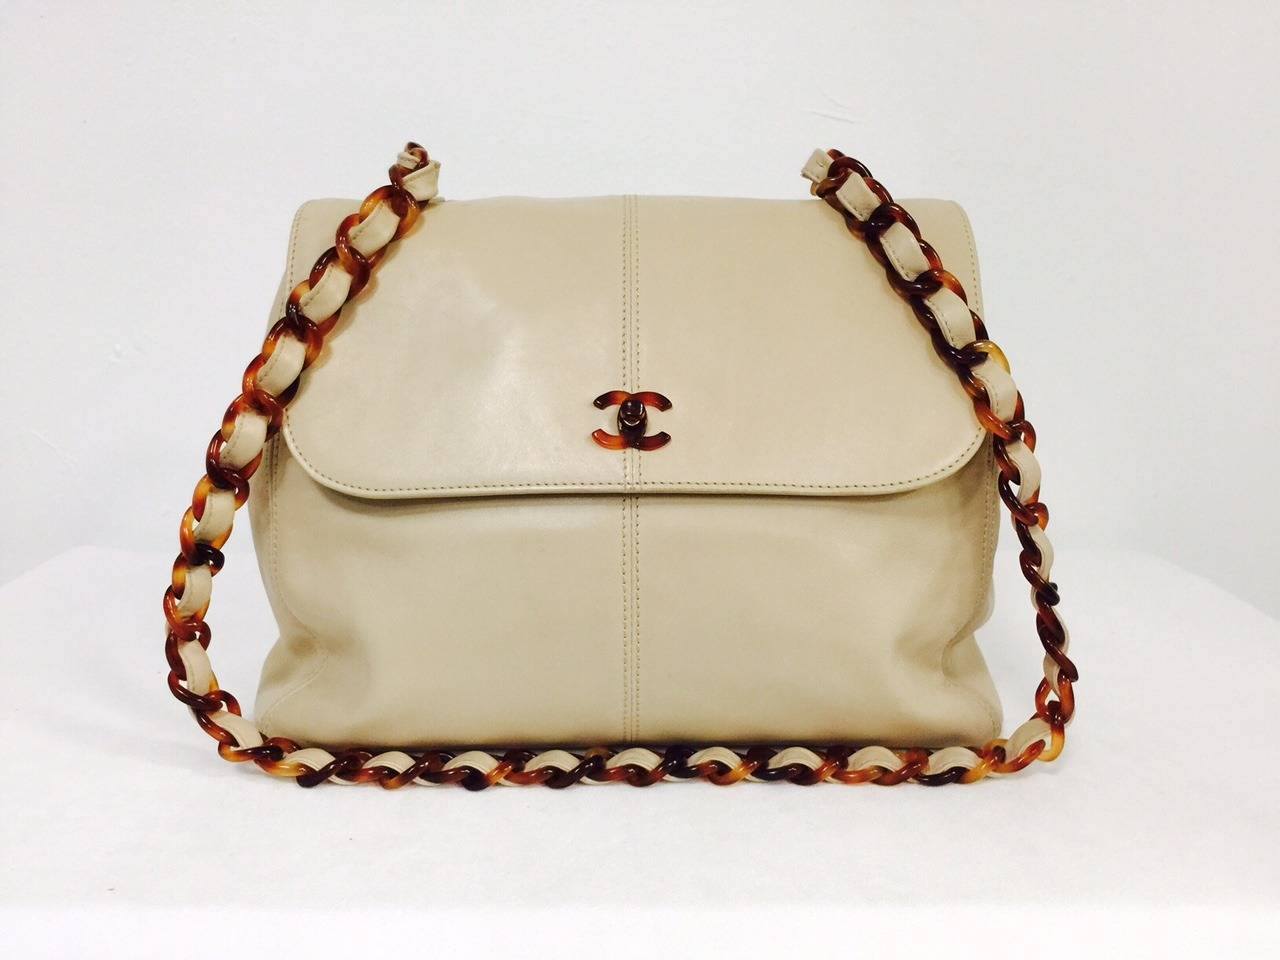 Tan Lambskin Shoulder Bag With Leather Woven Strap is quintessential Coco!   It's no secret that Chanel loved the color tan.  Why?  It goes with everything!  This larger soft lambskin bag features a half flap, luxurious fabric lining and two